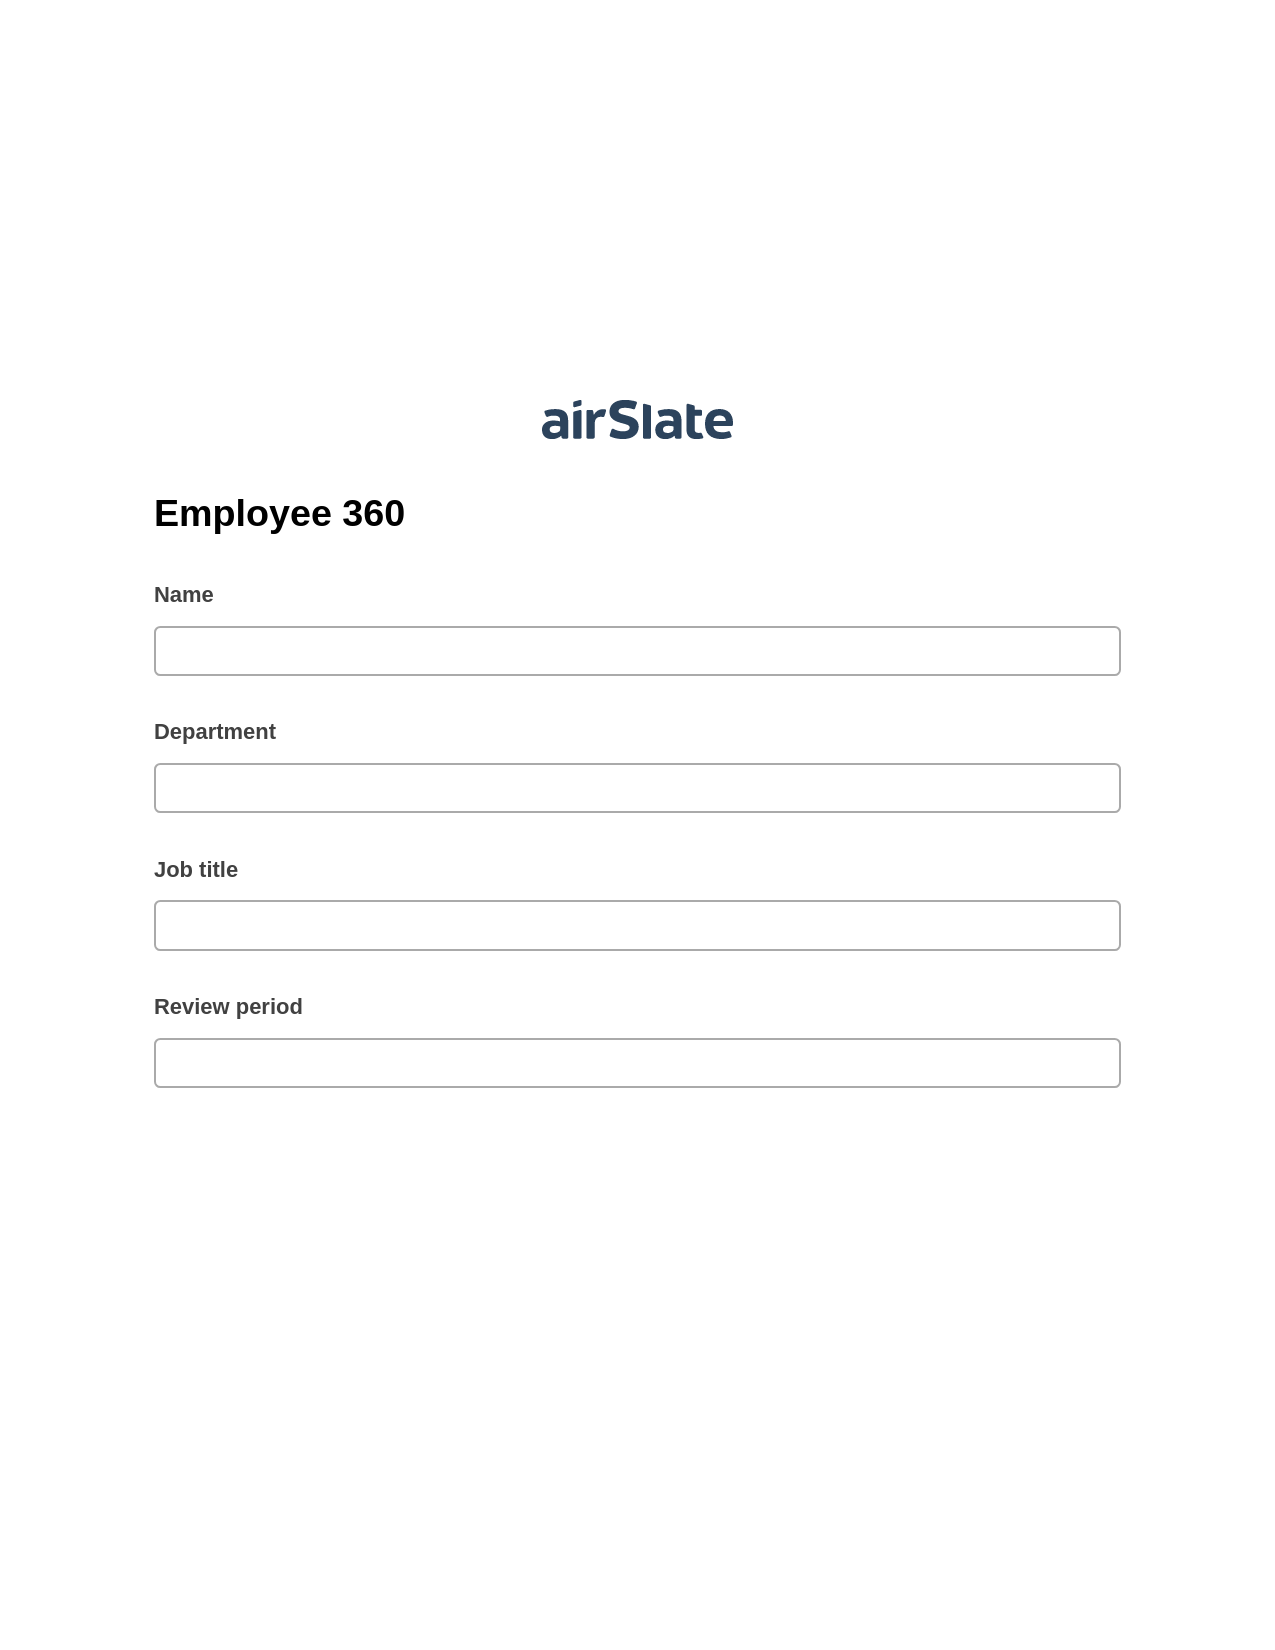 Employee 360 Pre-fill from CSV File Bot, Export to MS Dynamics 365 Bot, Webhook Postfinish Bot